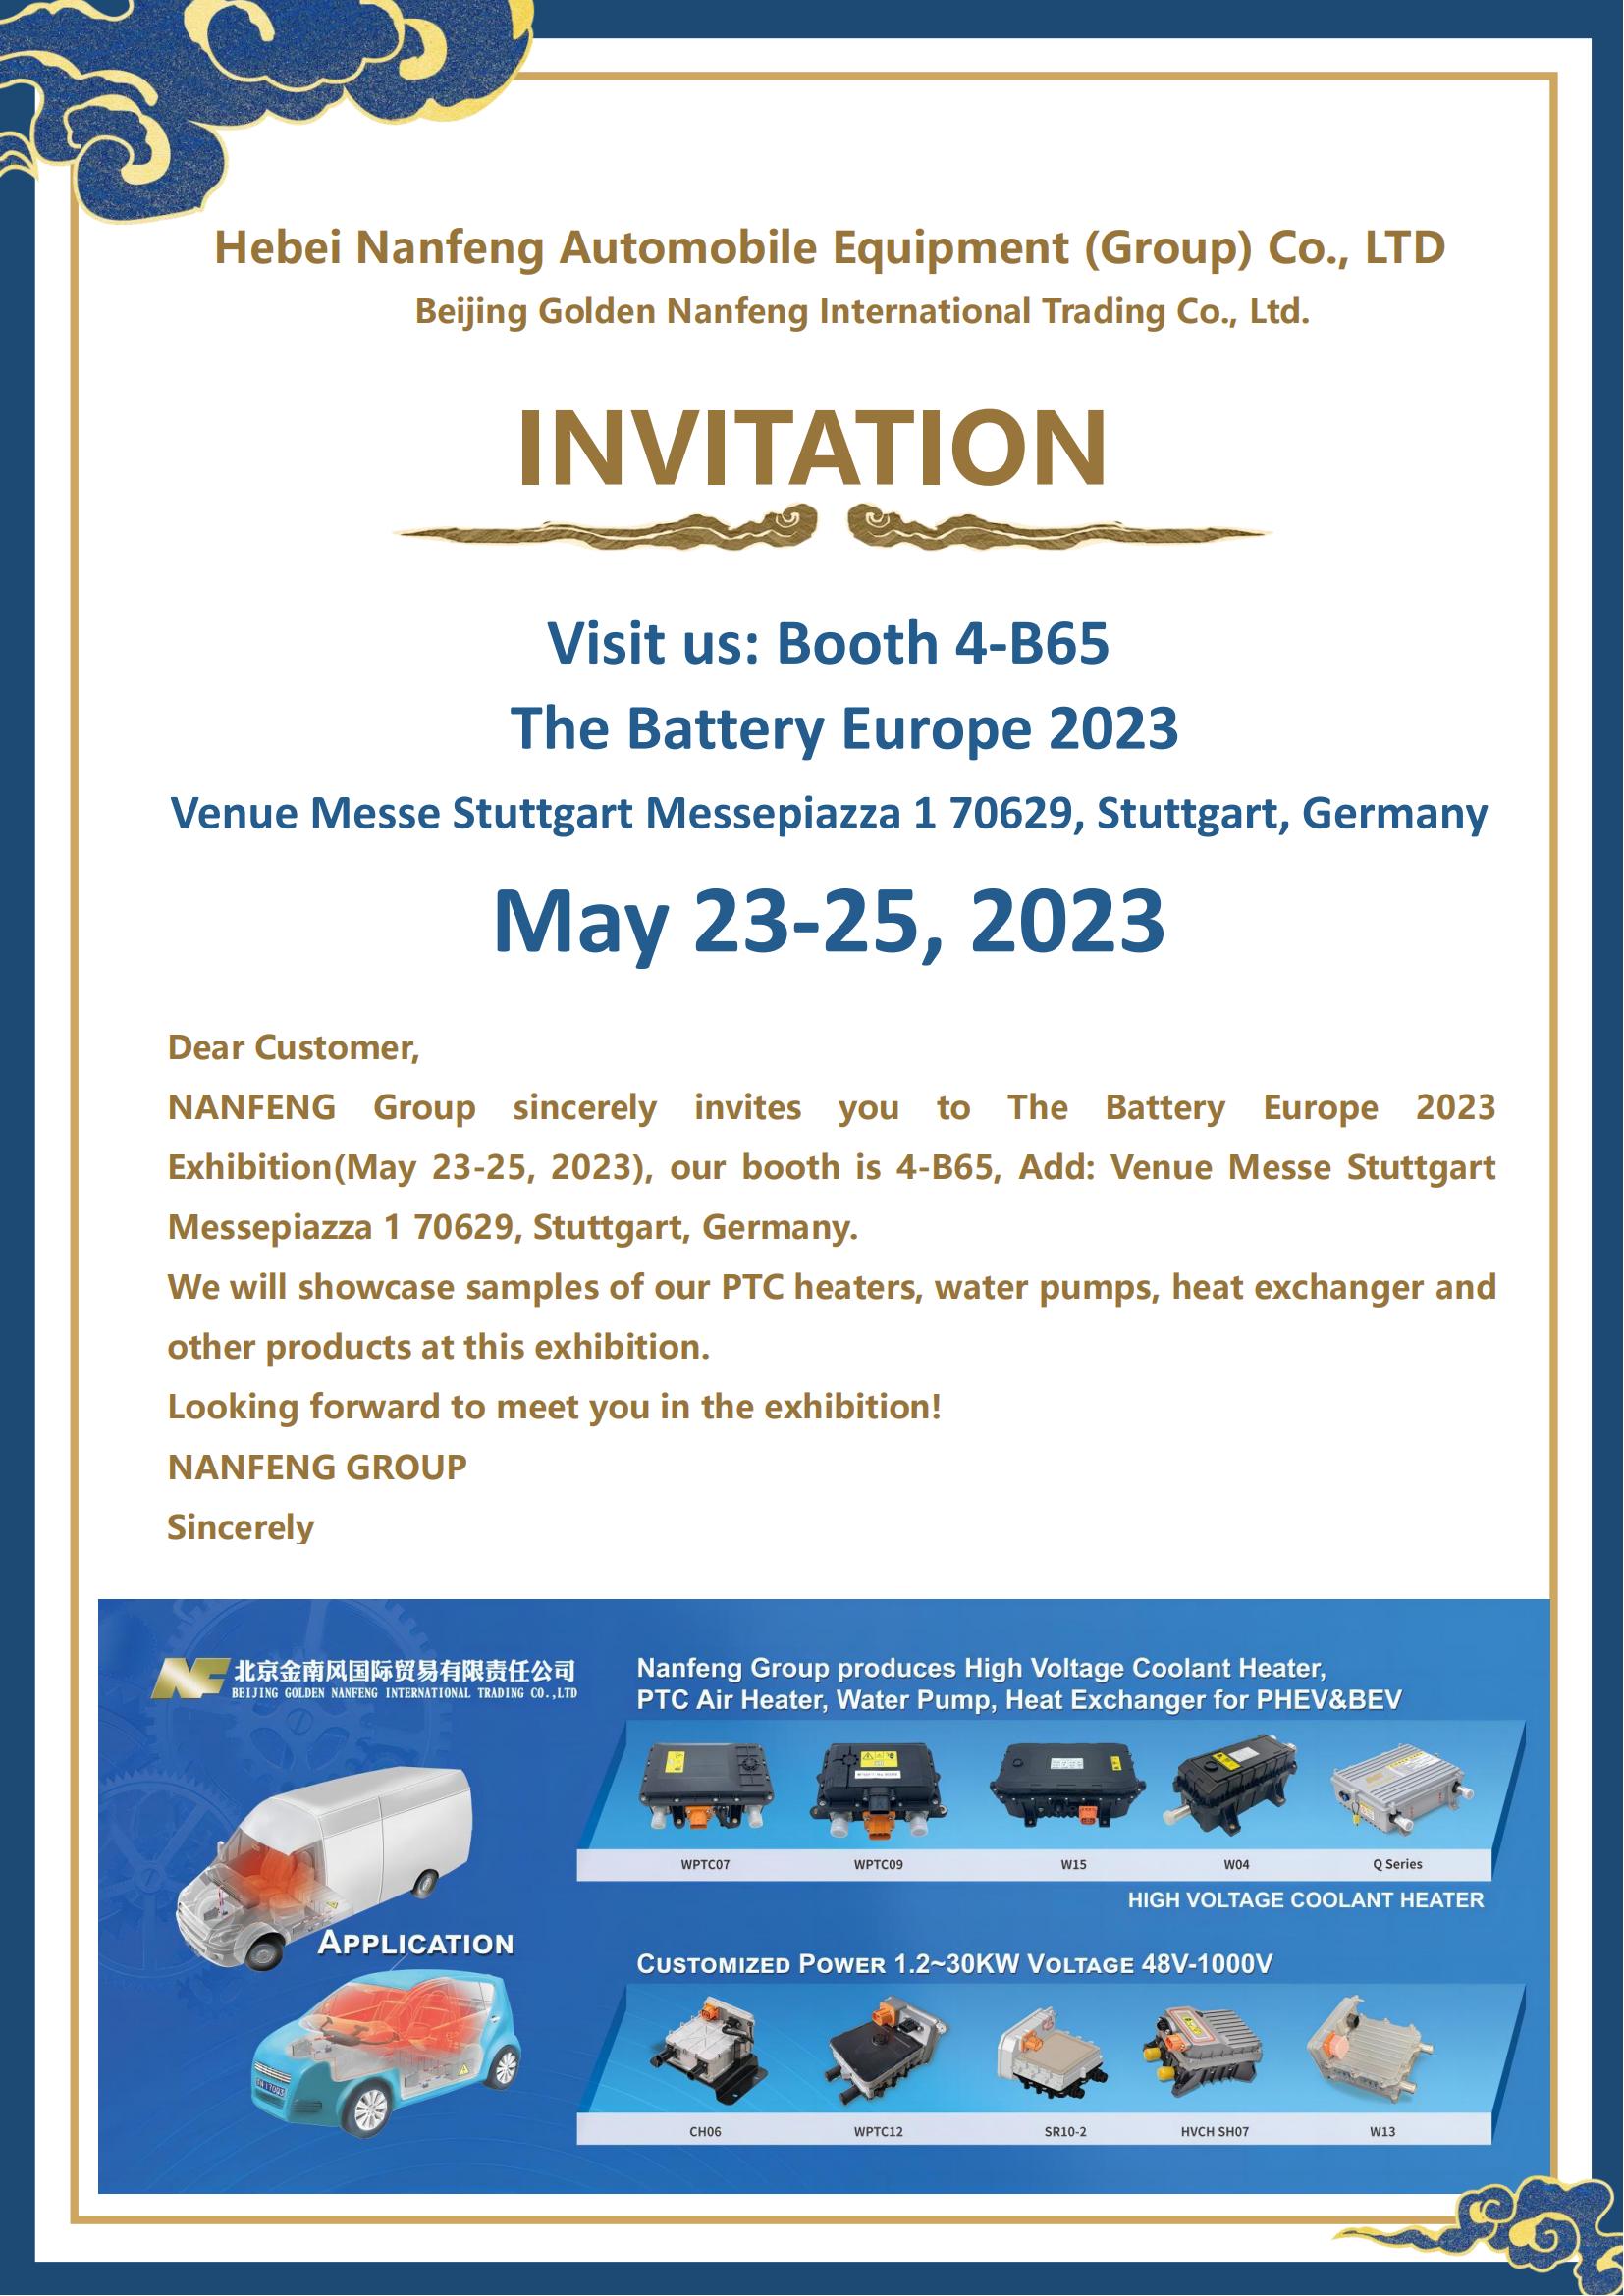 The Battery Europe 2023 Exhibition(May 23-25, 2023)